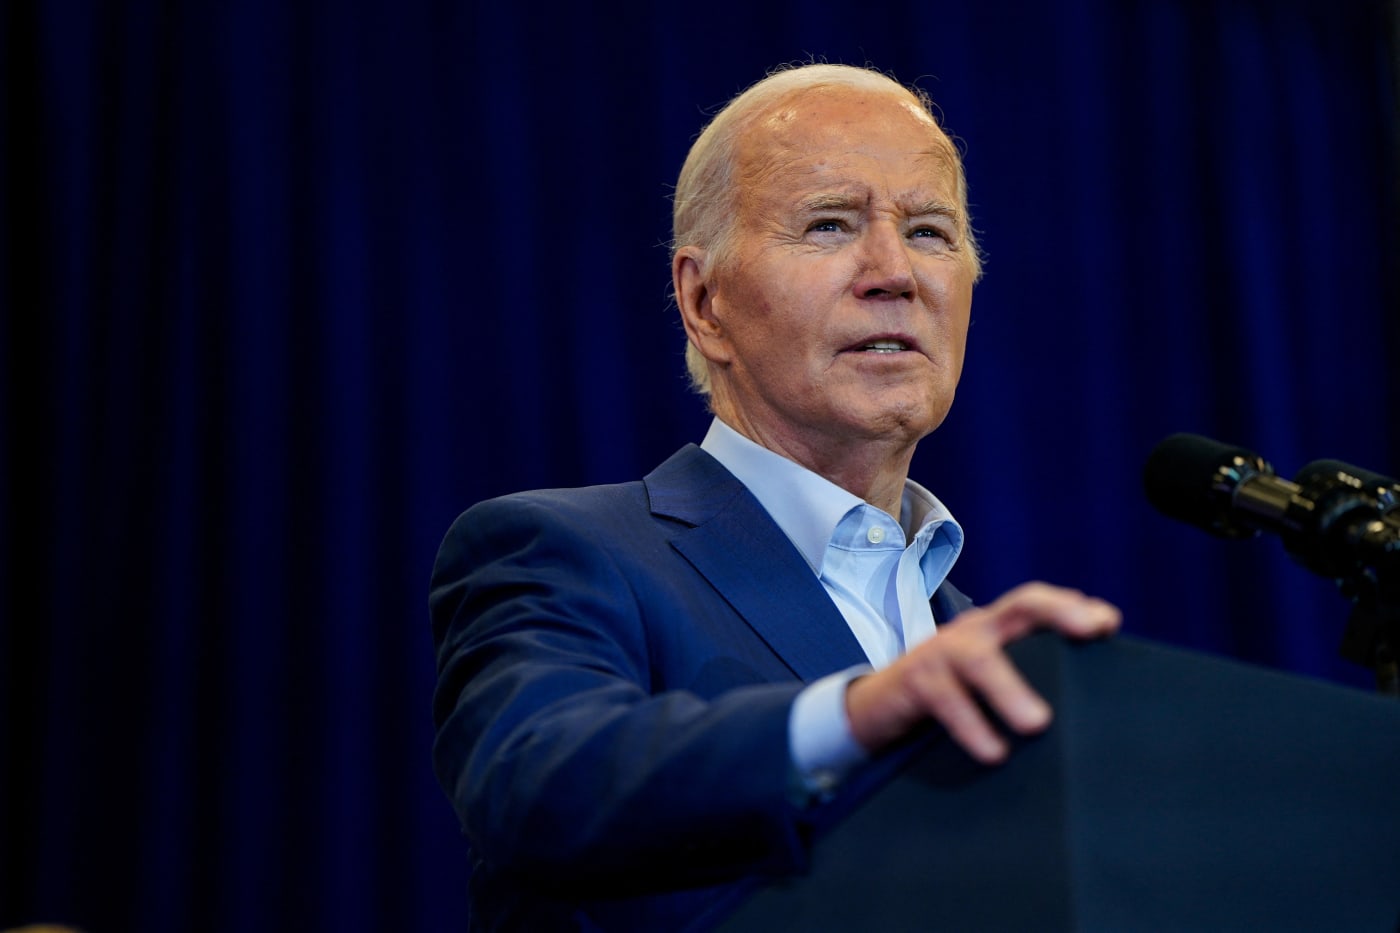 Biden signs bill to reauthorize FISA warrantless surveillance program for two more years